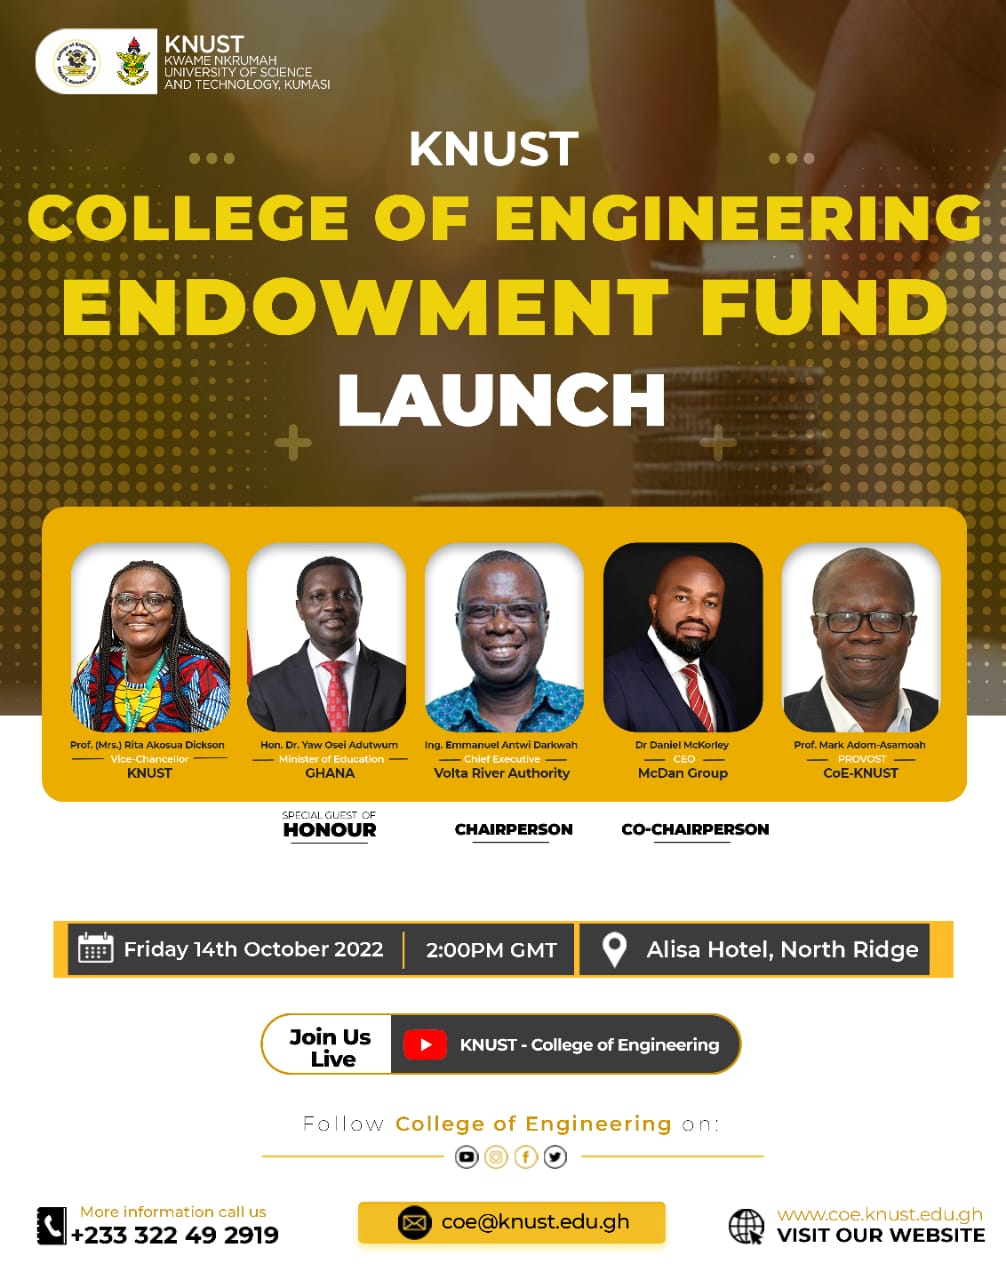 KNUST College of Engineering Endowment Fund Launch